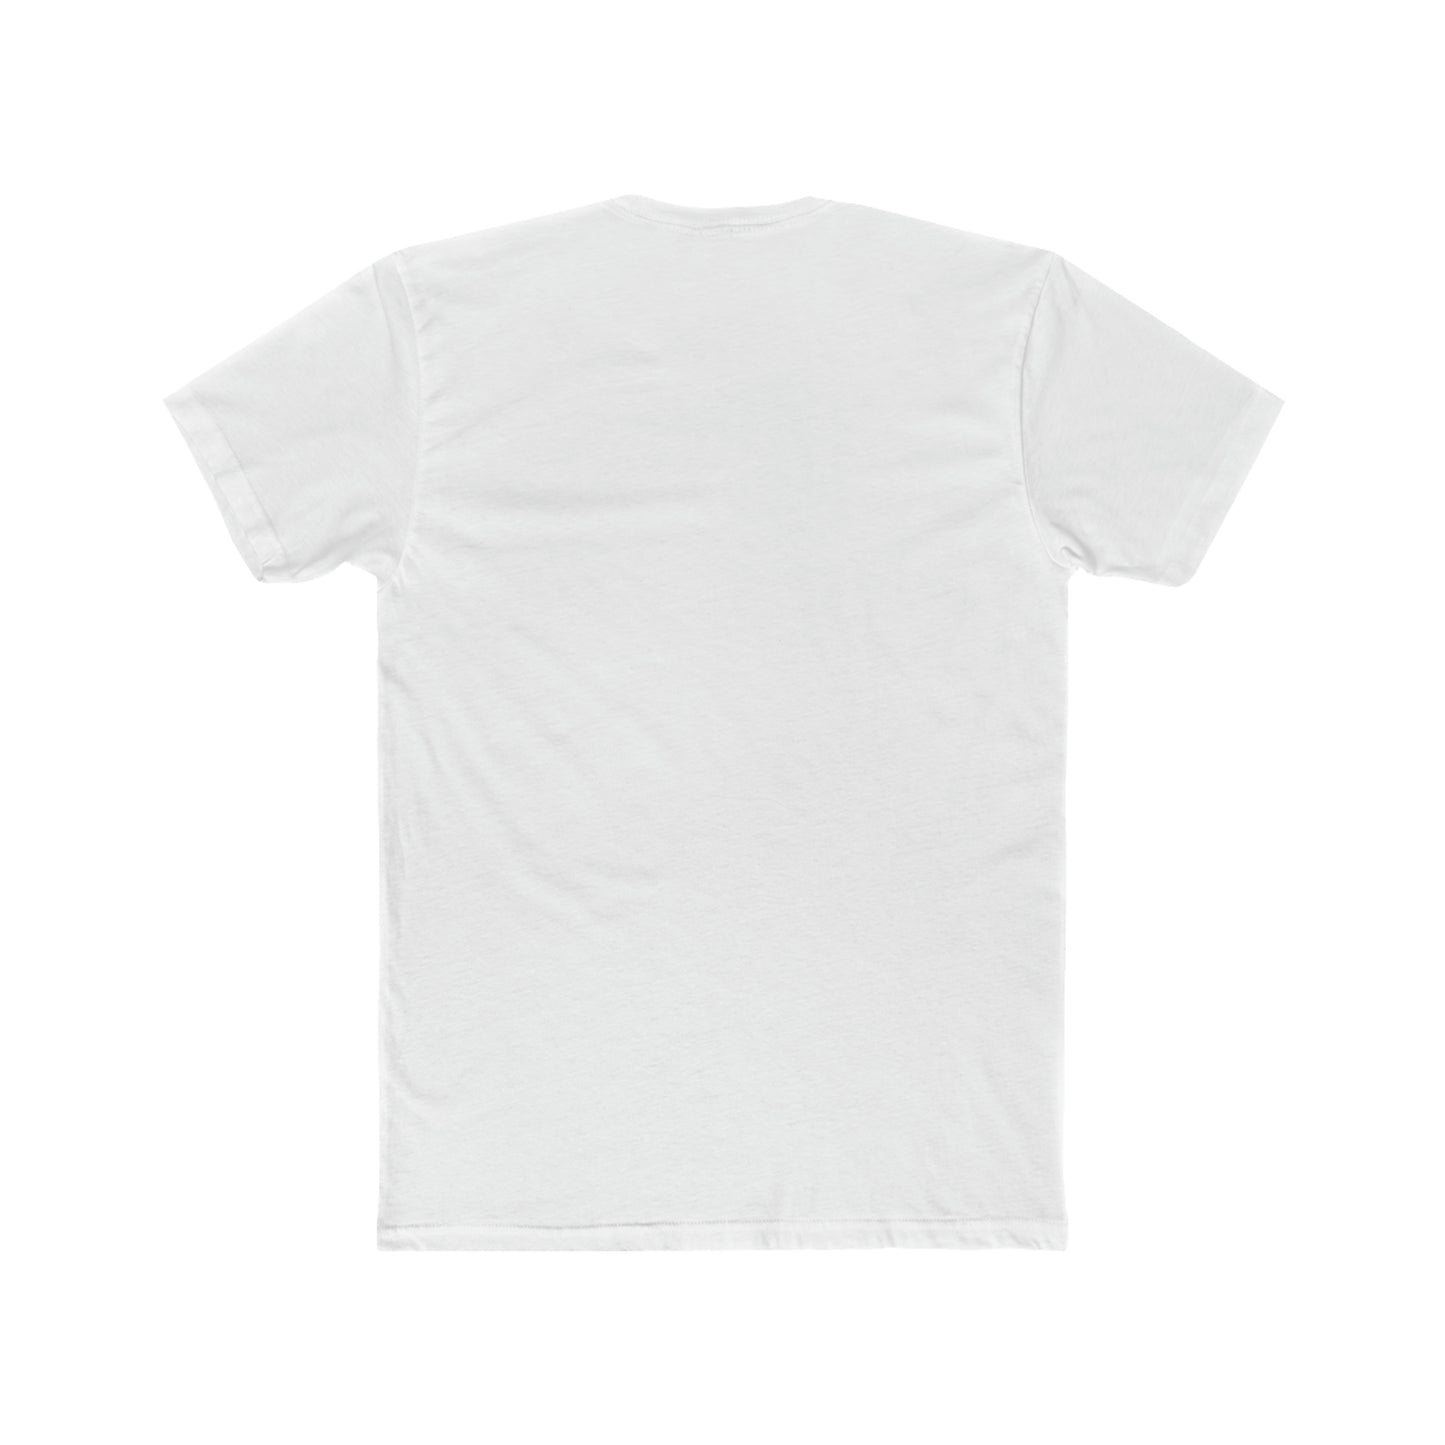 Michigan Upper Peninsula T-Shirt (w/ UP Outline) | Men's Fitted